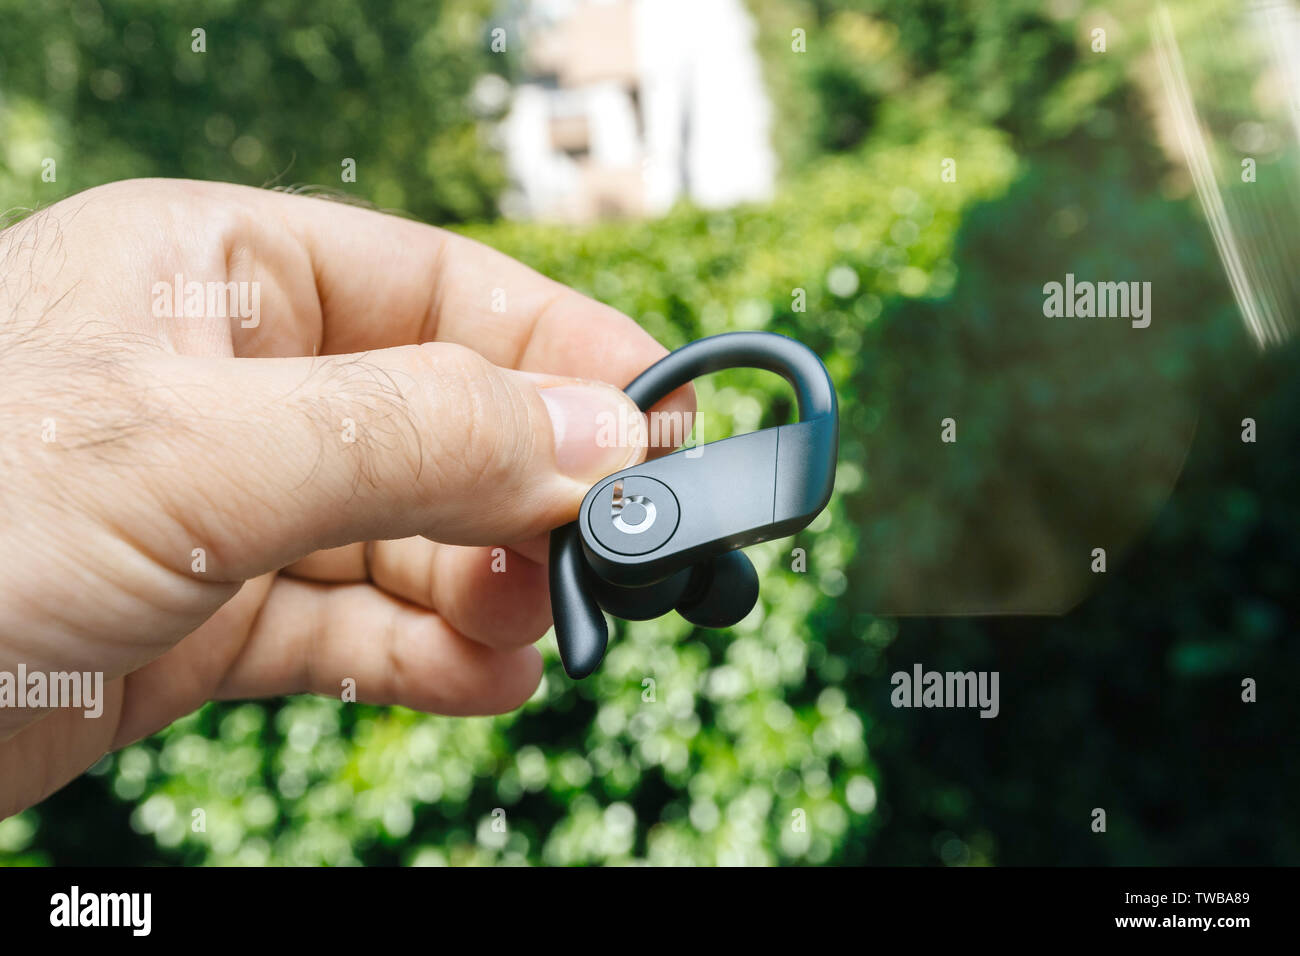 Paris, France - Jun 17, 2019: Close-up of man hand holding new Powerbeats Pro Beats by Dr Dre wireless high-performance earphone with integrated Siri - green park forest background Stock Photo